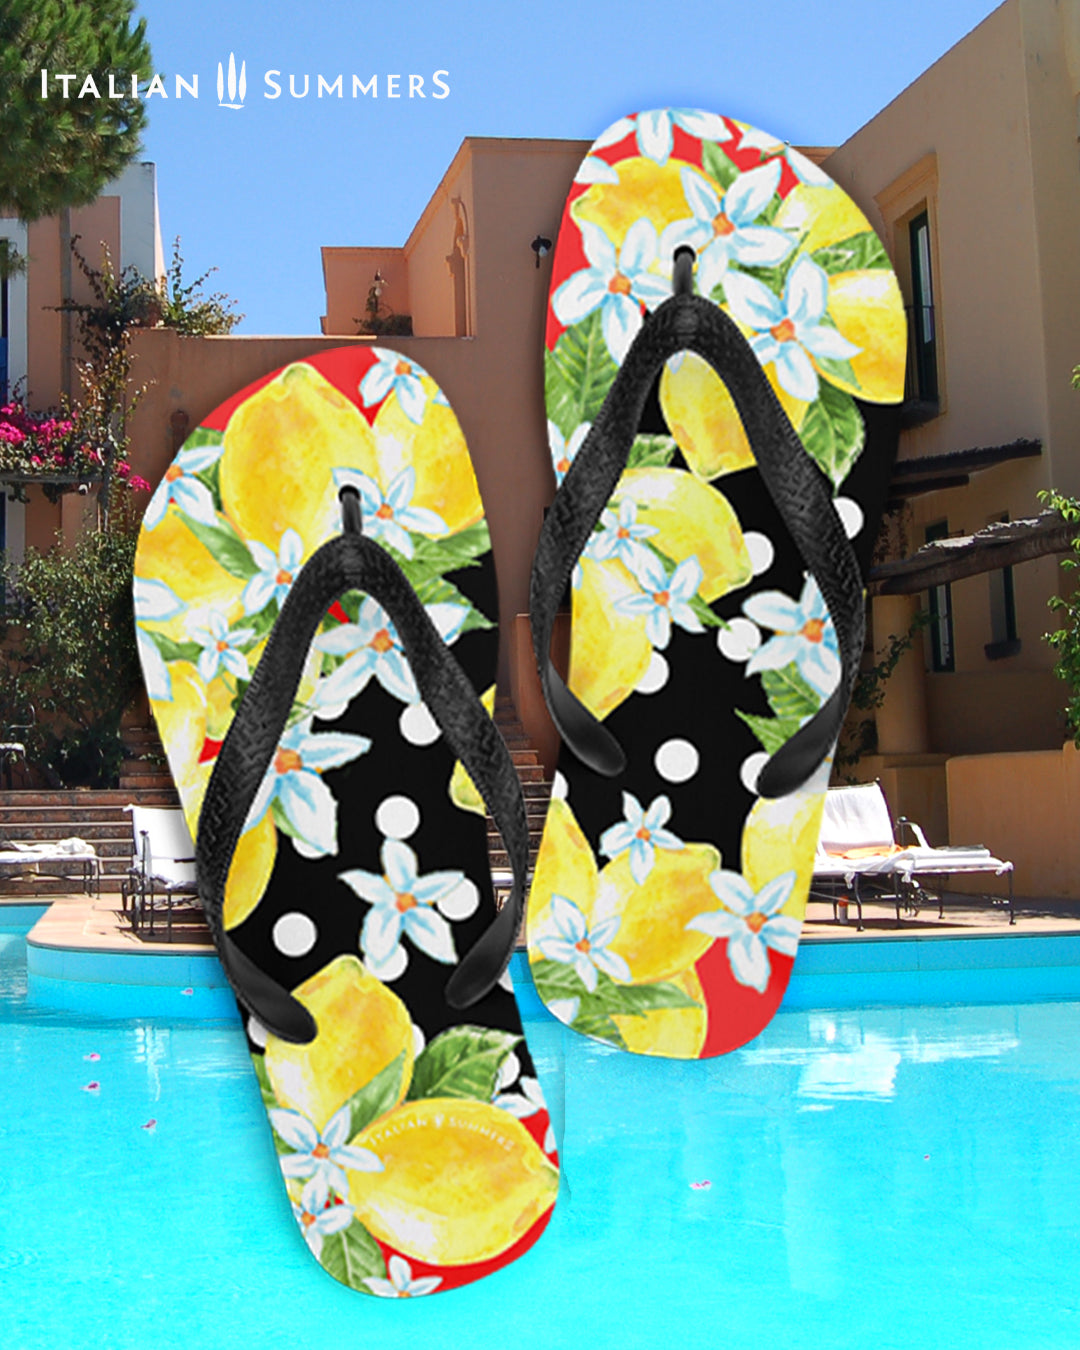 Italy inspired Flip Flops with bunches of Sorrento Lemons and lemon flowers over a field ow white polka dots and a black backround. Made by Italian Summers